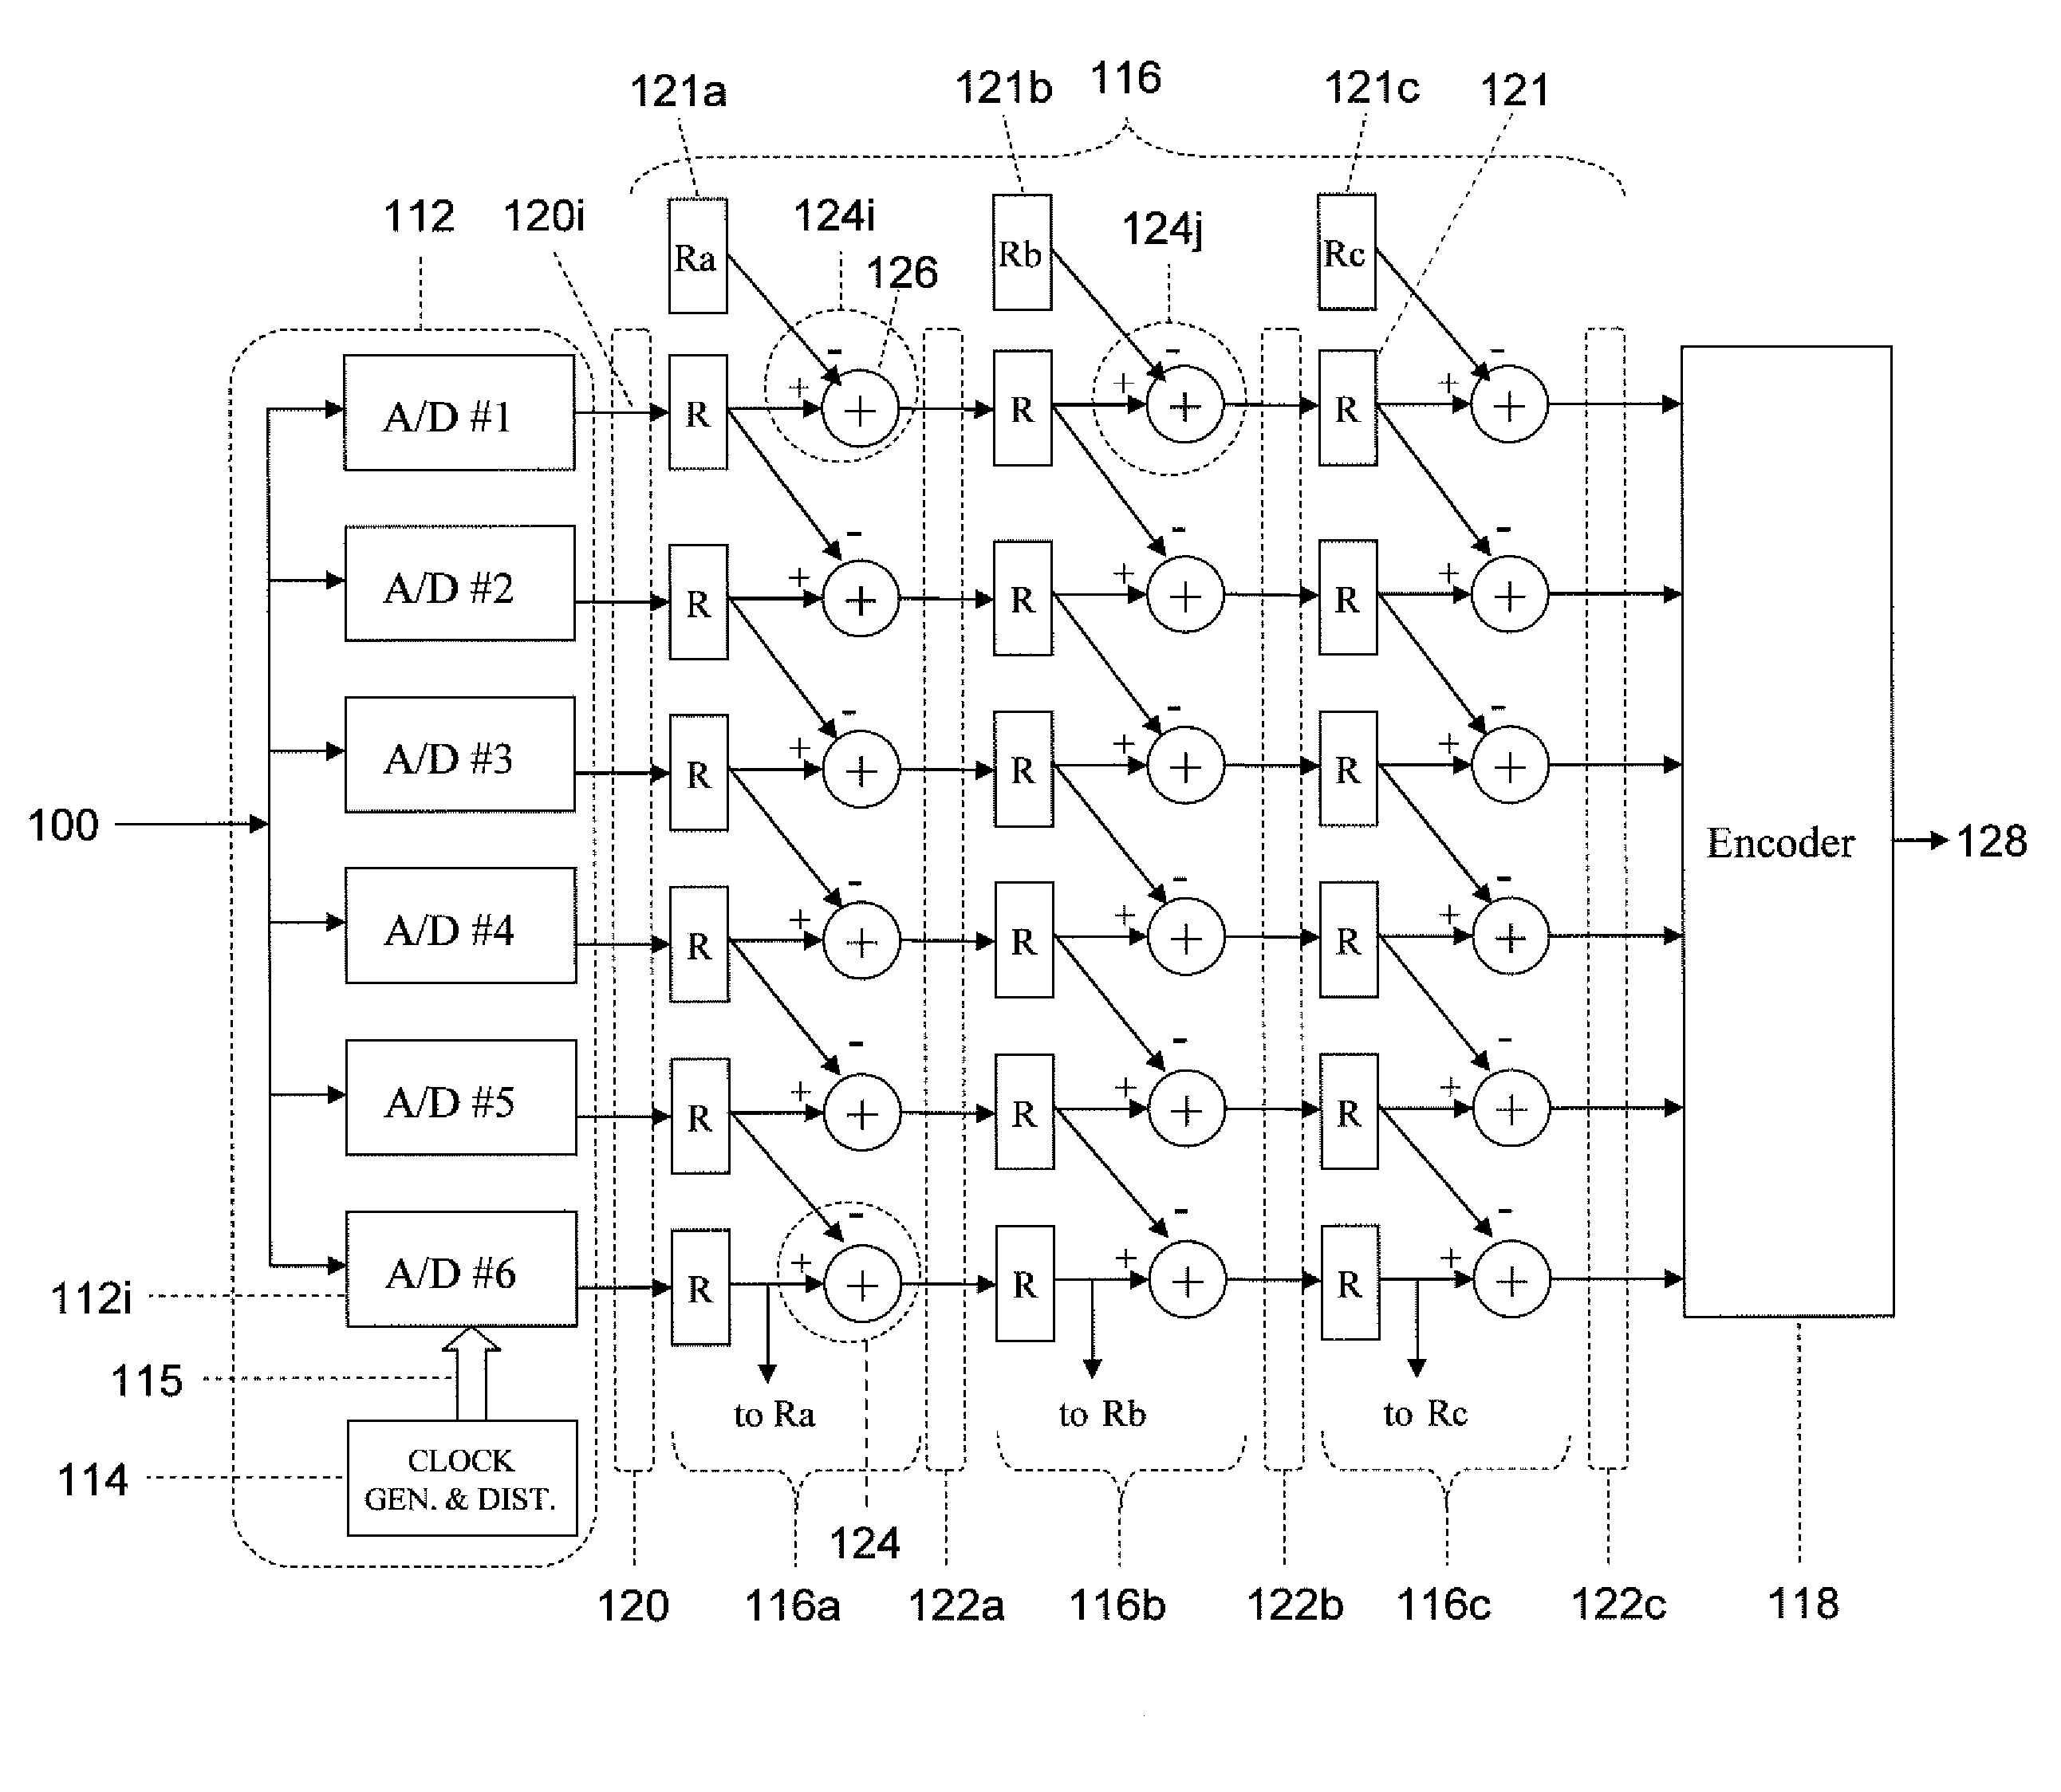 Enhanced time-interleaved A/D conversion using compression